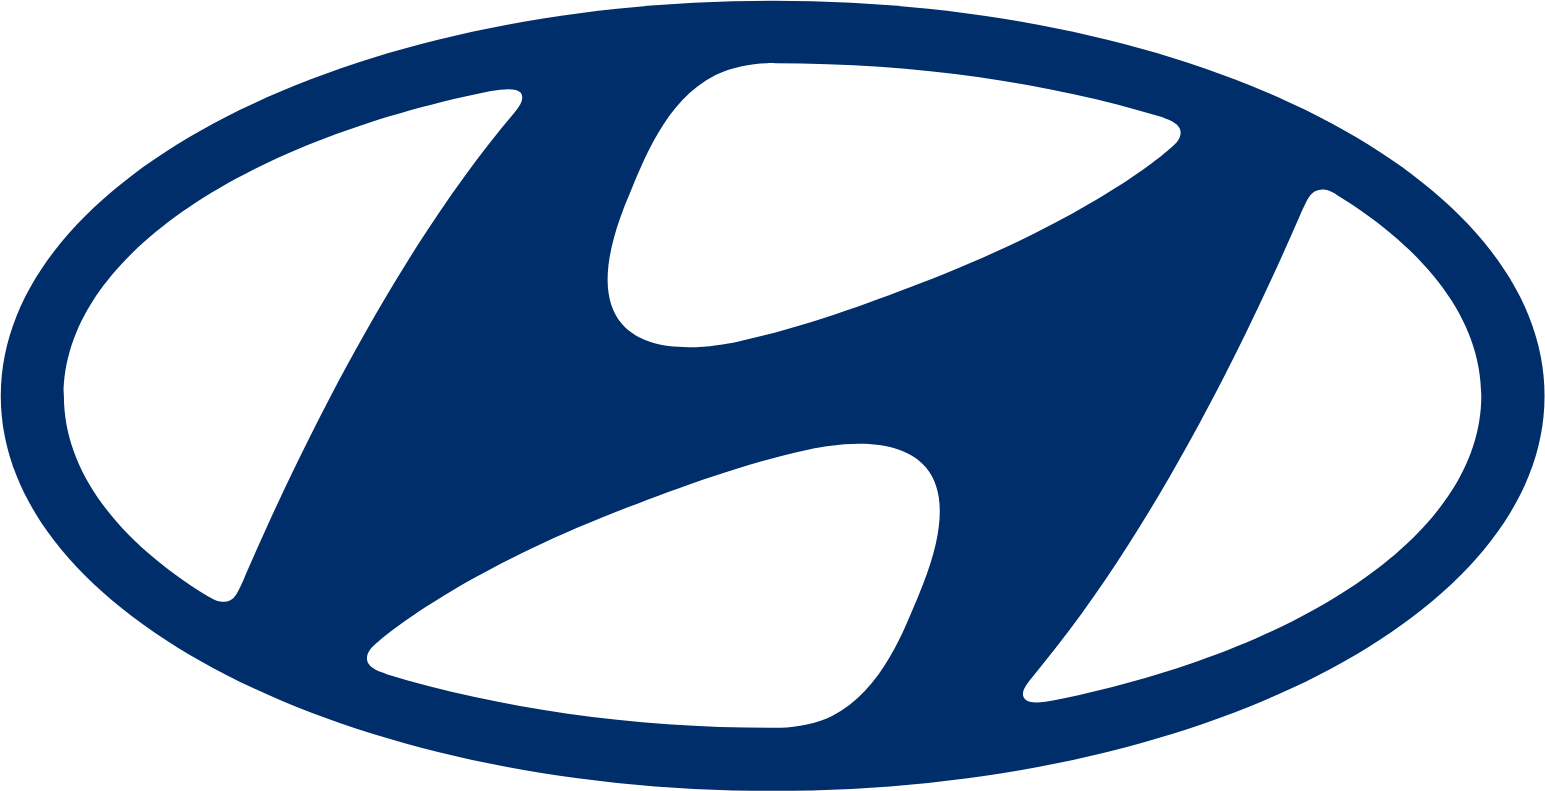 Hyundai Logo In Transparent Png And Vectorized Svg Formats